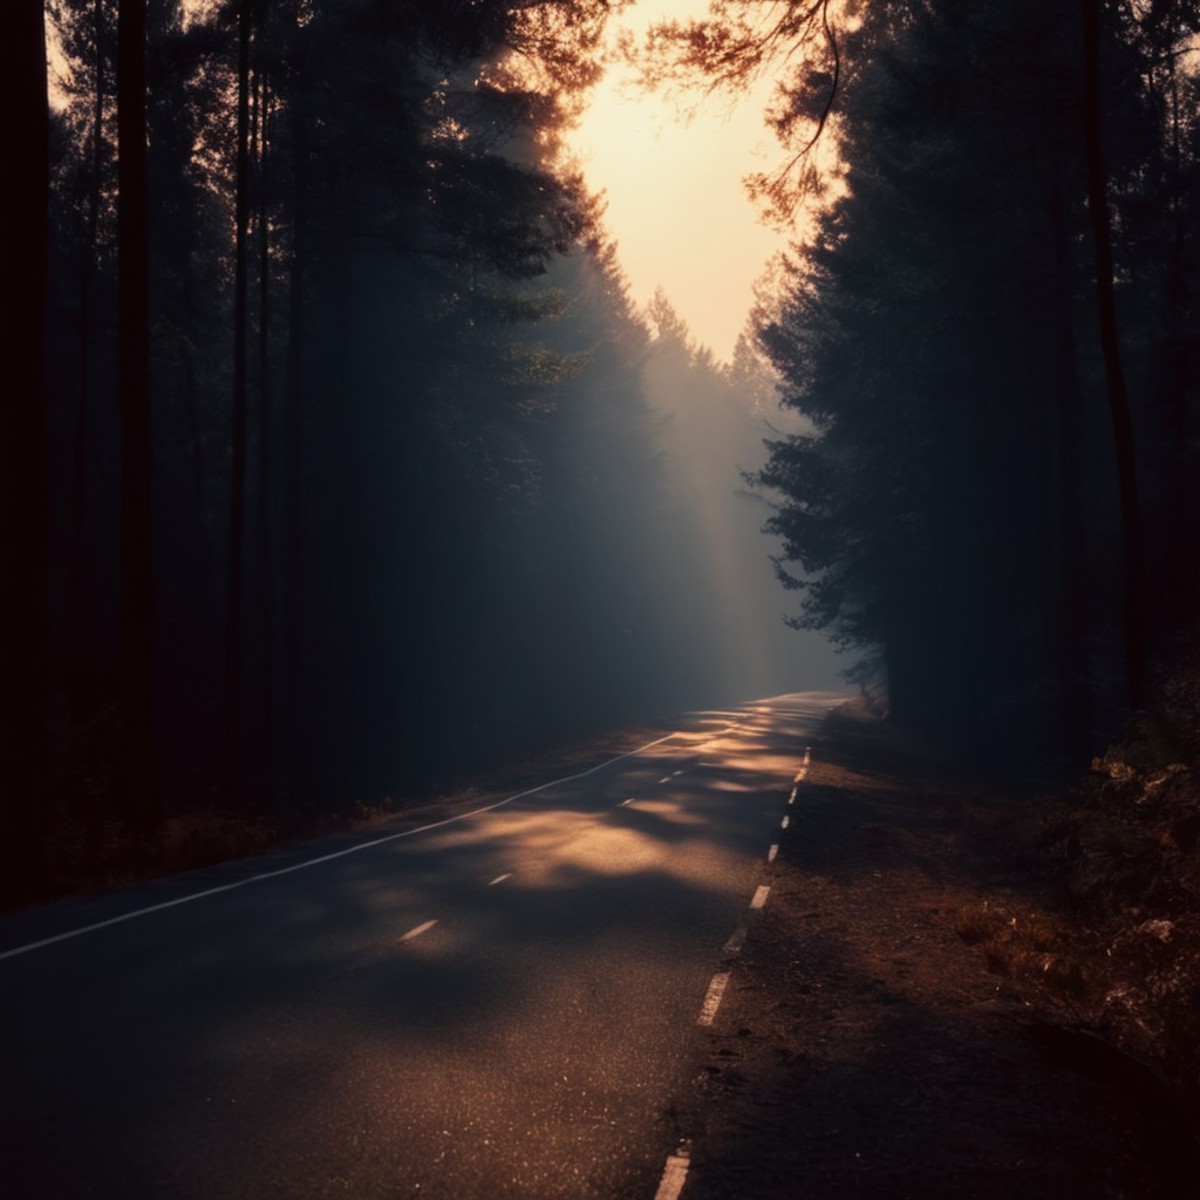 cinematic film still of  <lora:backlight style:1>
A backlight photo of a road in the middle of a forest with a fire in the...